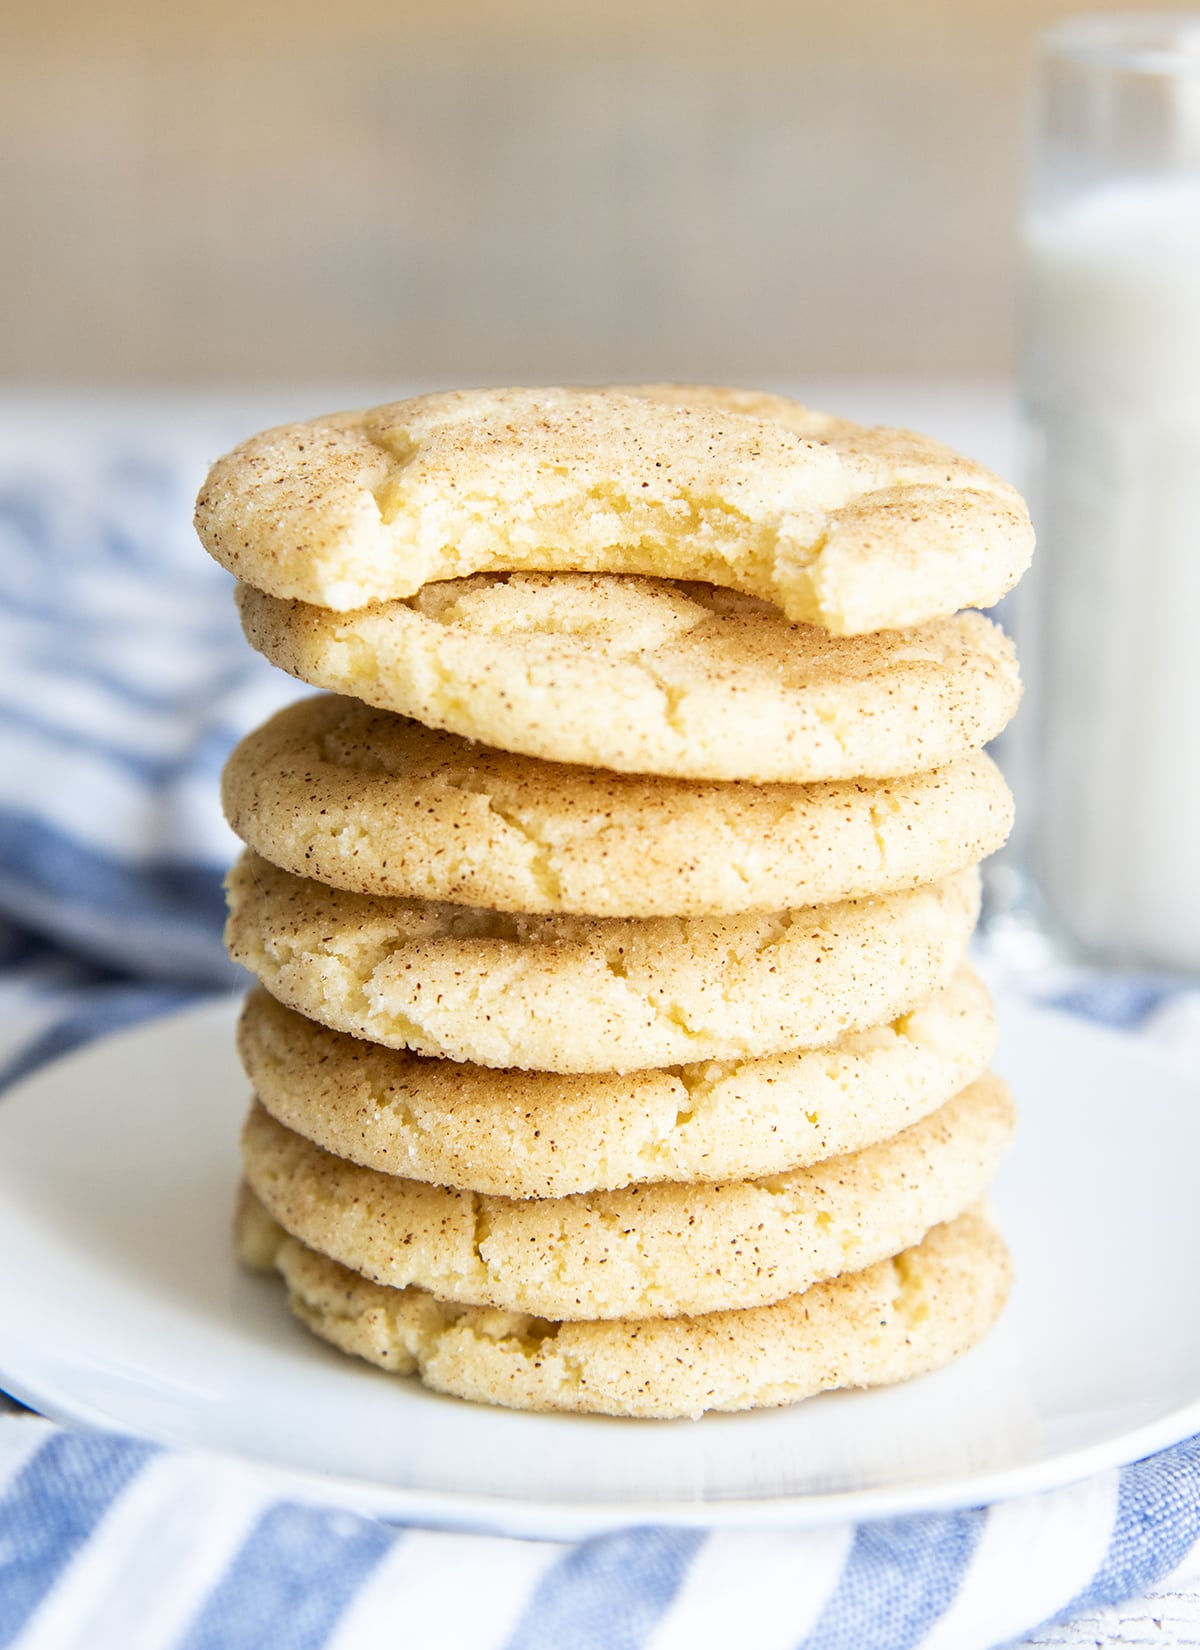 A stack of snickerdoodles. The top cookie has a bite out of it.